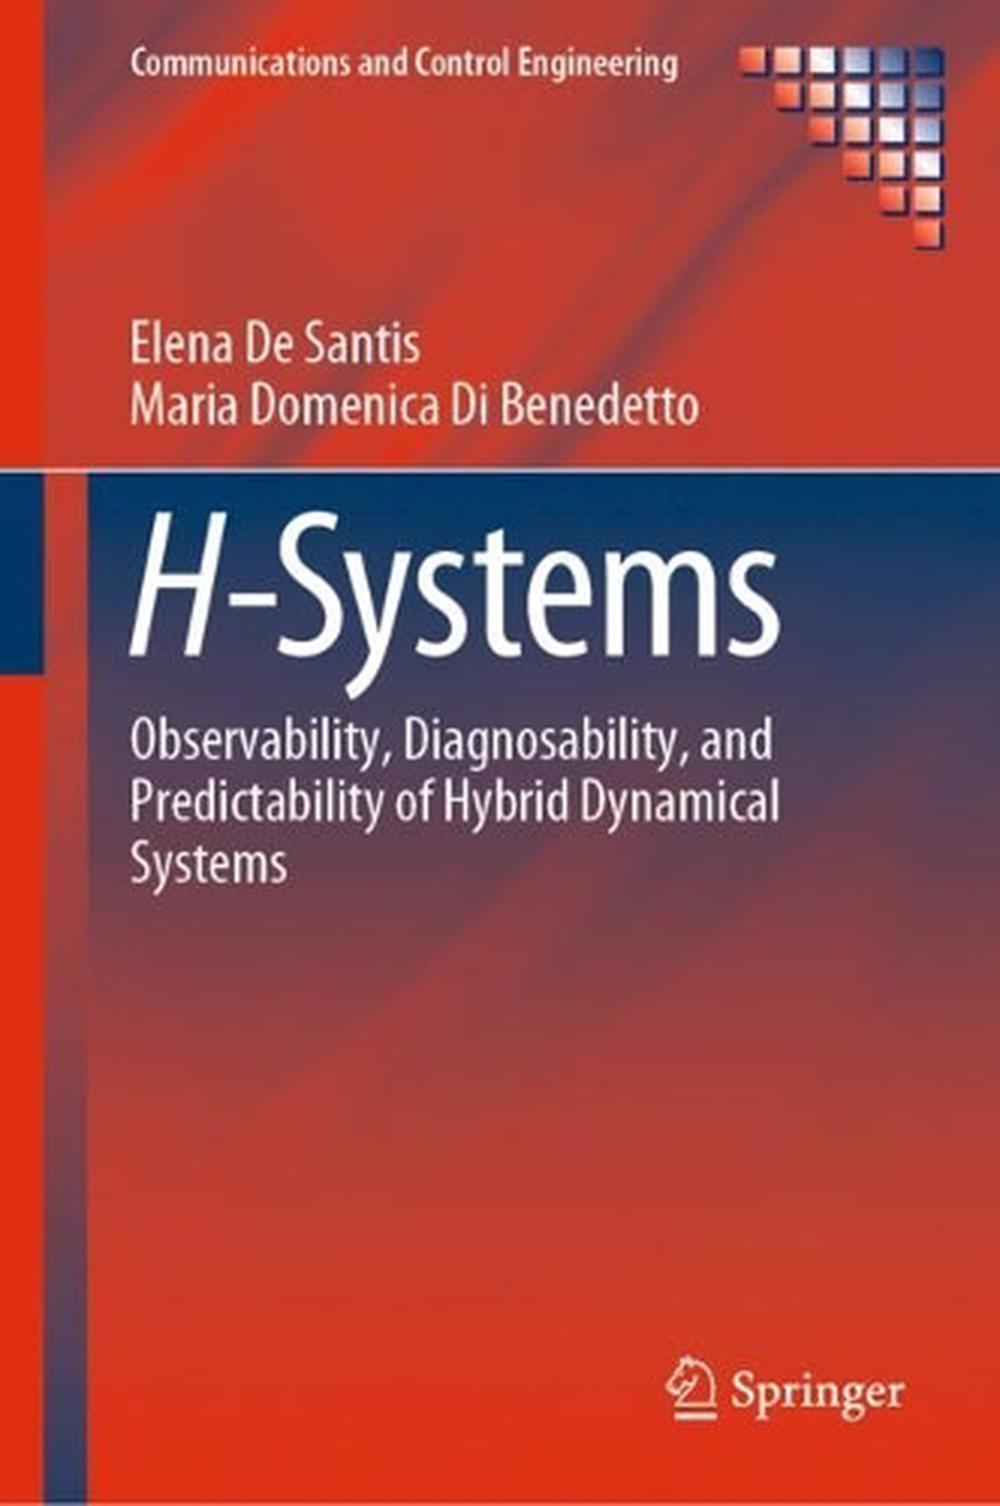 online　by　H-Systems　Buy　Elena　Santis,　9783031204463　De　Hardcover,　Nile　at　The